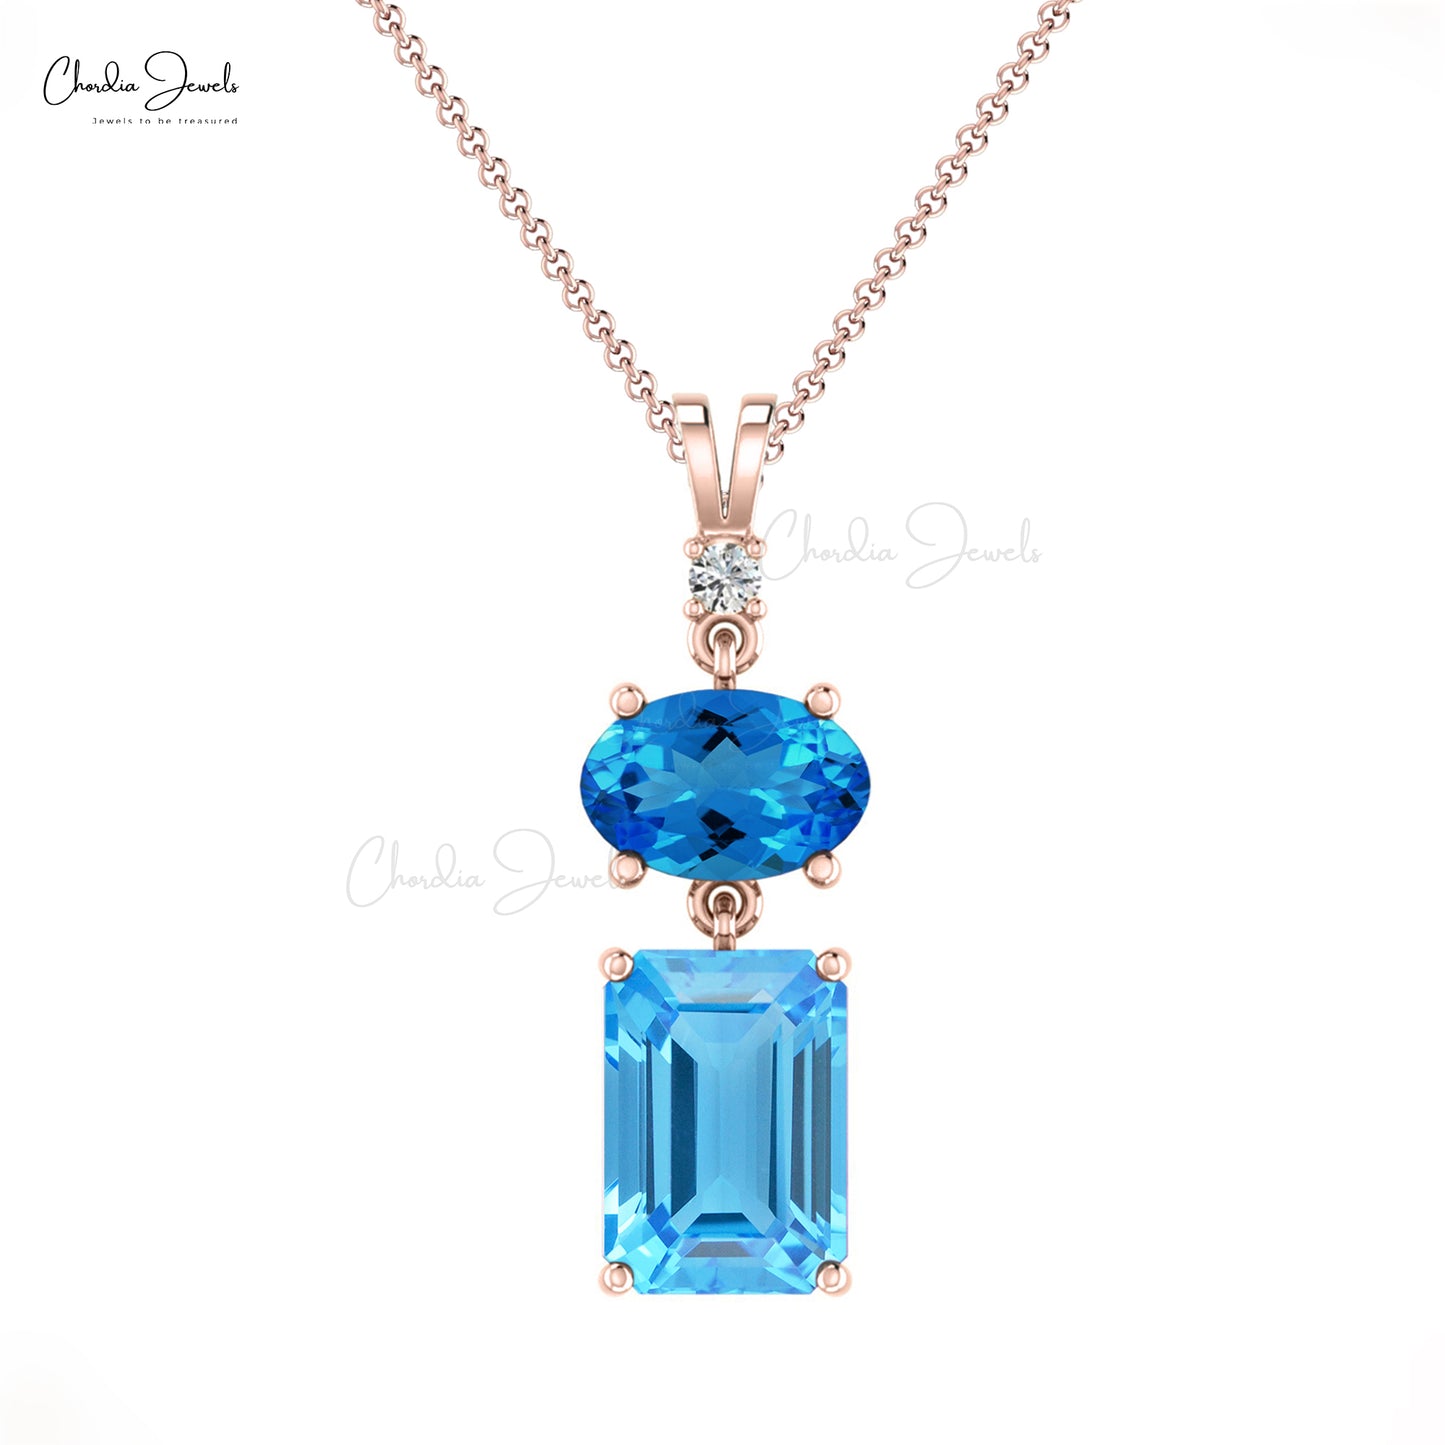 Authentic Blue Topaz 1.78 Ct 4-Prong Set Pendant For Women 14k Solid Gold April Birthstone Diamond Accented Pendant Hallmarked Jewelry